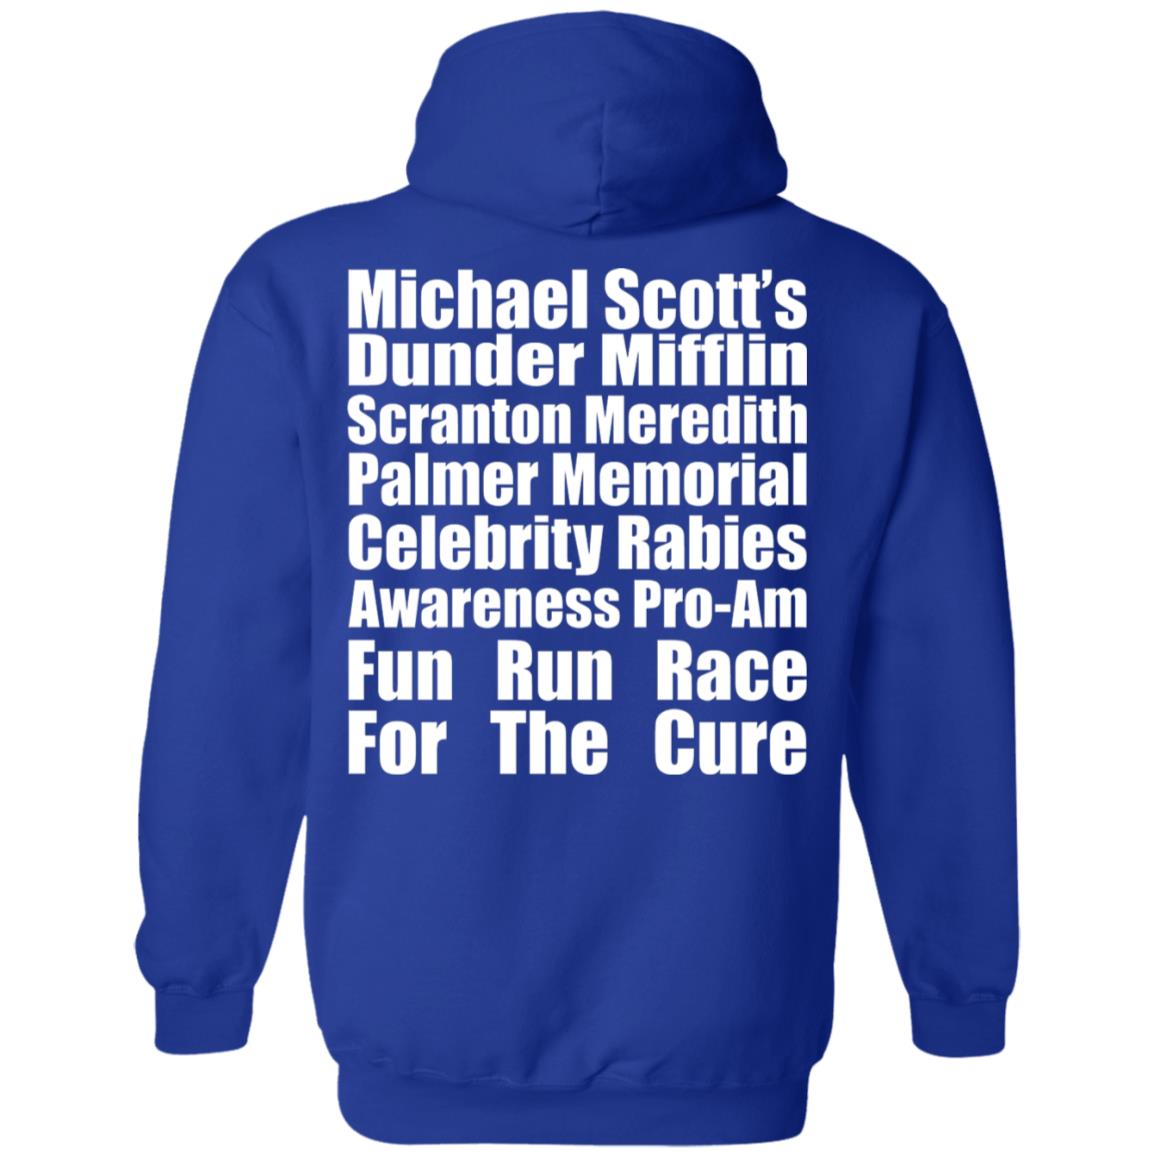 Michael Scott's Dunder Mifflin Scranton Meredith Palmer Memorial Shirt -  Allbluetees - Online T-Shirt Store - Perfect for your day to day!